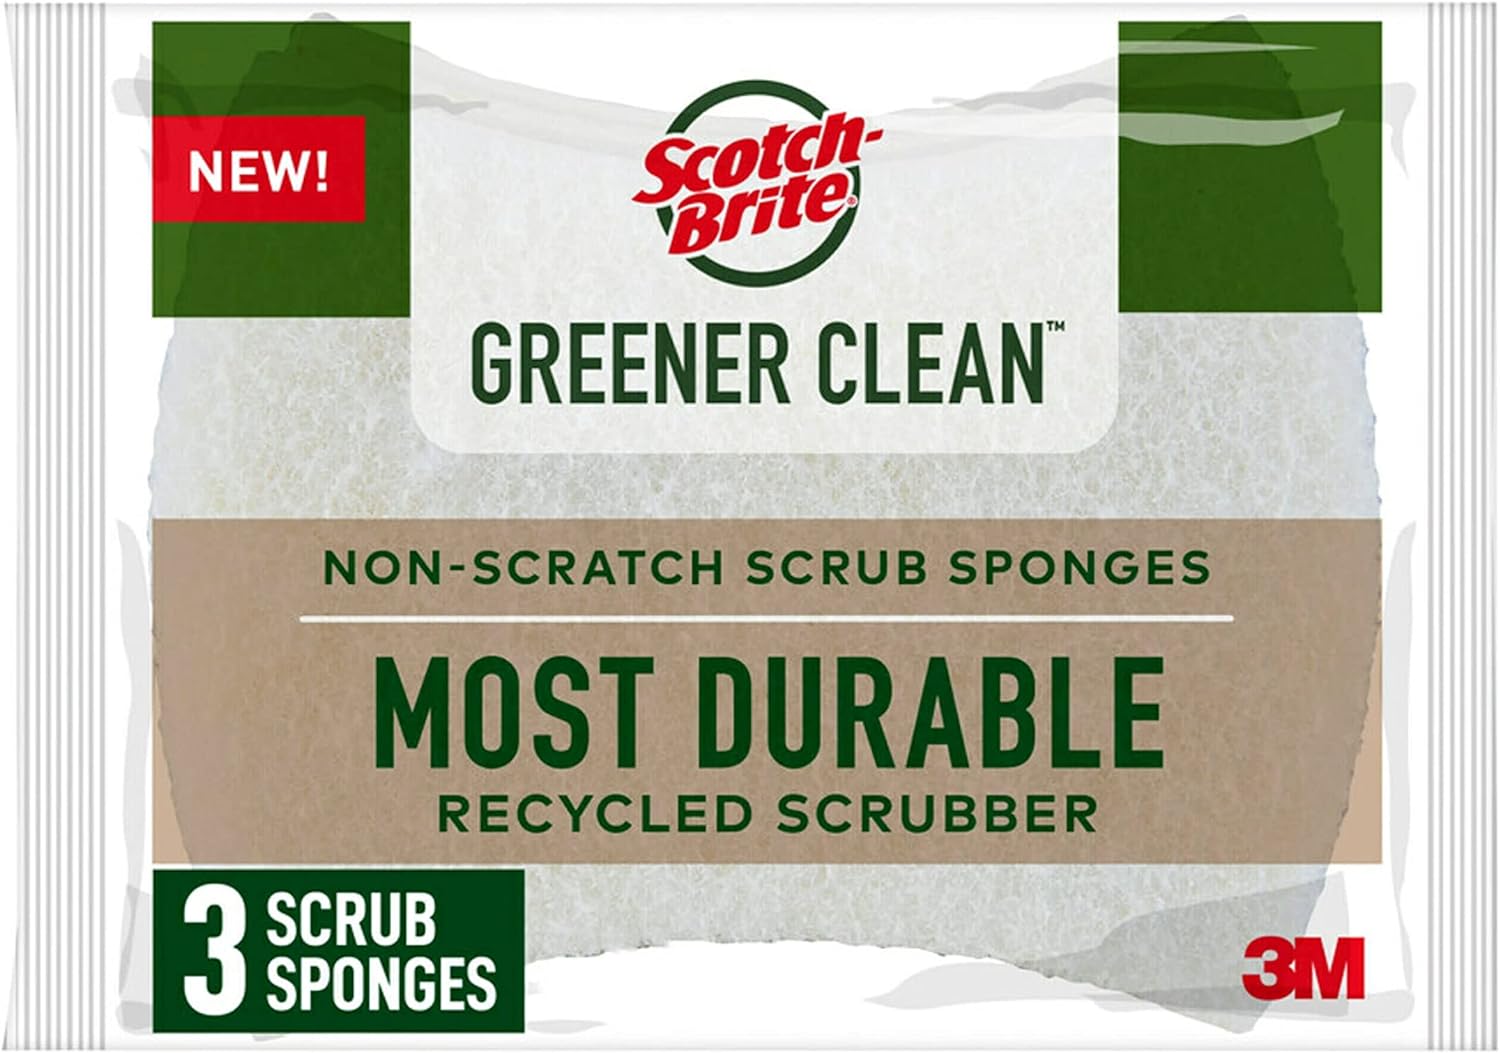 These are perfectly good sponges. The scrubber scrubs, but is gentle, and the sponge is good, and holds up well. I like them.I chose them instead of the blue Scotch rite scrubby sponges I've been using for years, which add plastic into the environment . This Greener Clean" version is marketed being made with plant-based sponges and recycled plastic for the scrubber.On the other hand, they're bright white, which means they might be manufactured using a ton of bleach. Is bleach used in the product